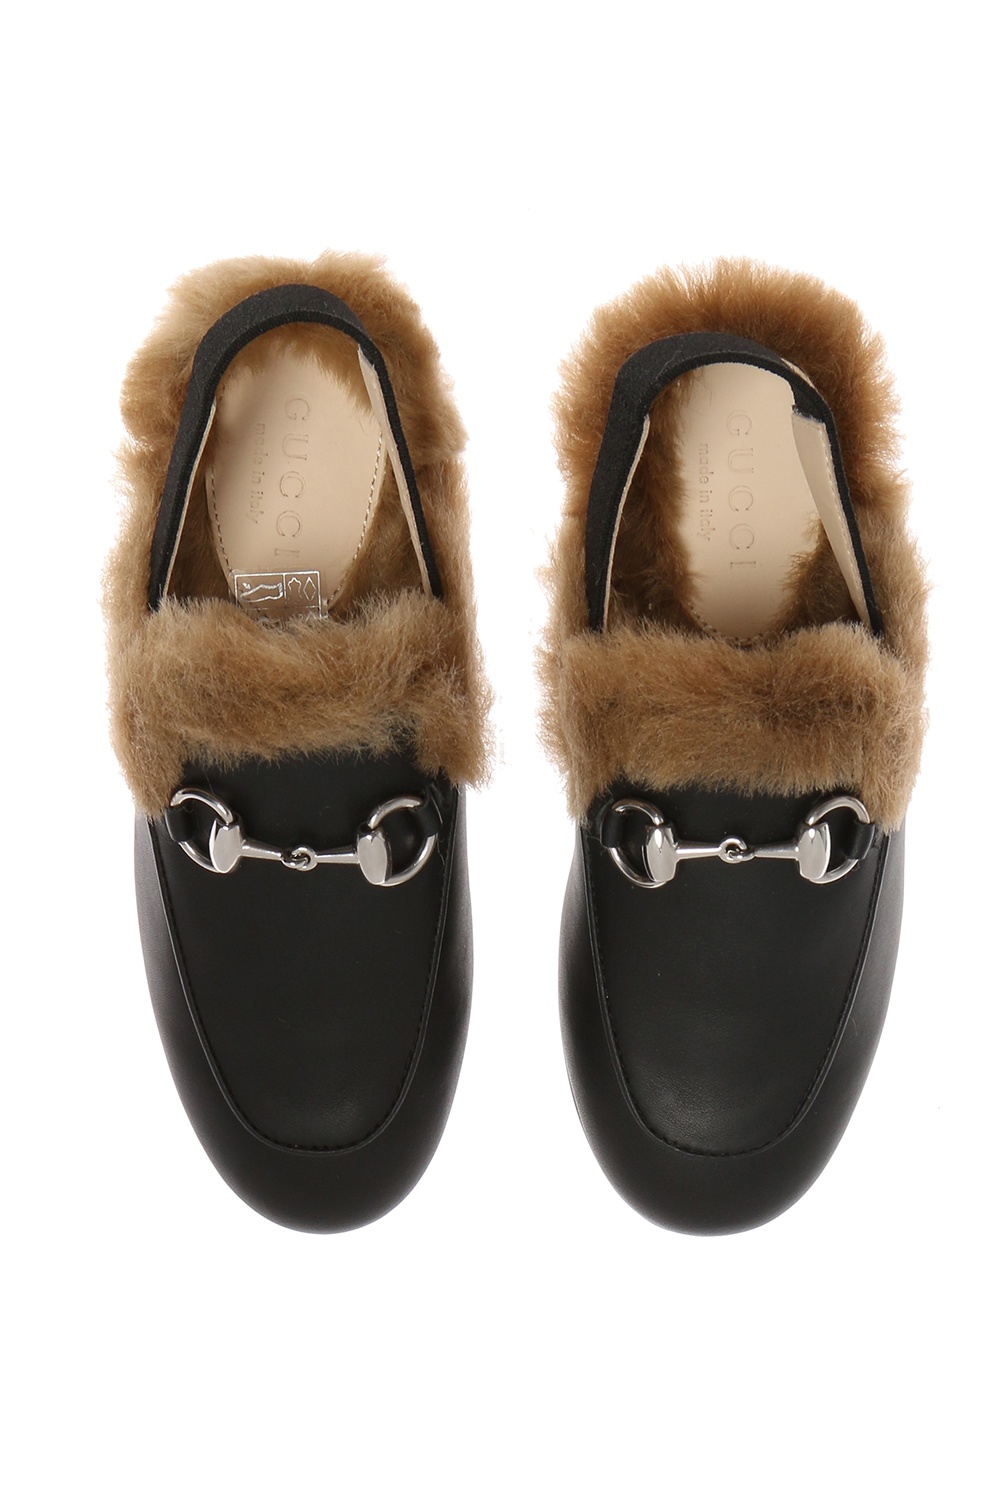 gucci slides with fur